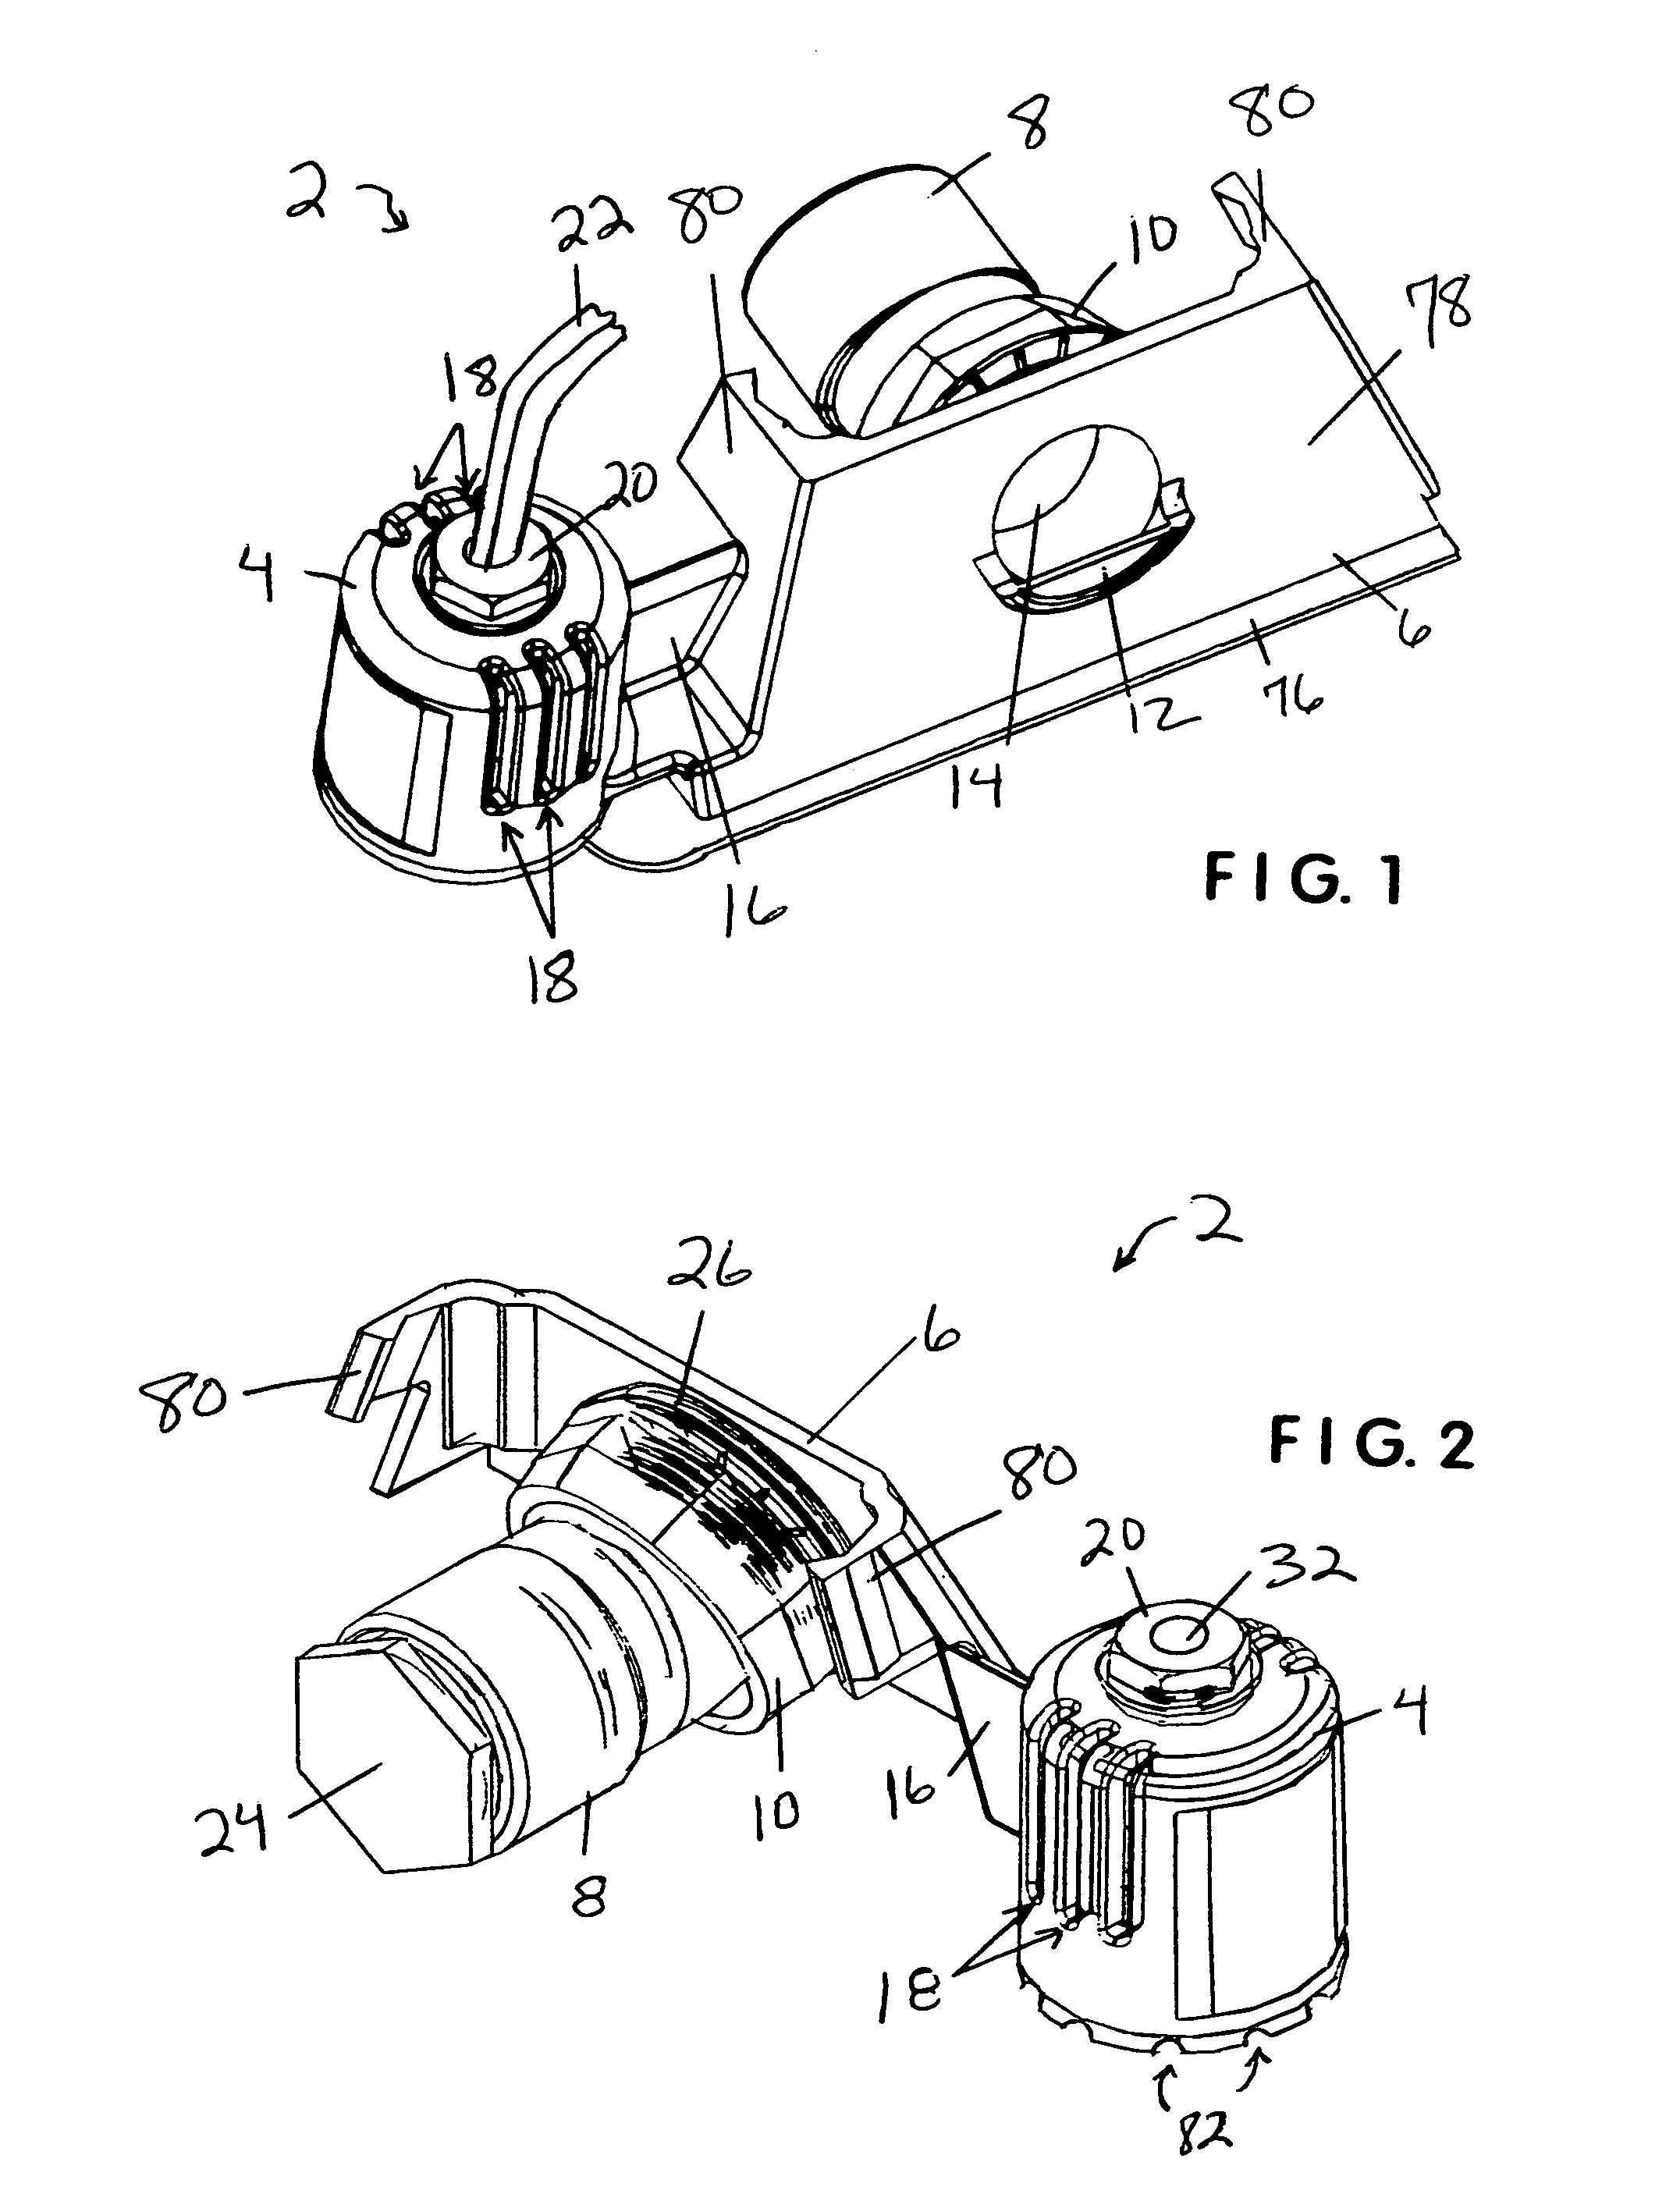 One-piece float switch housing and drain line assembly with condensate collection pan